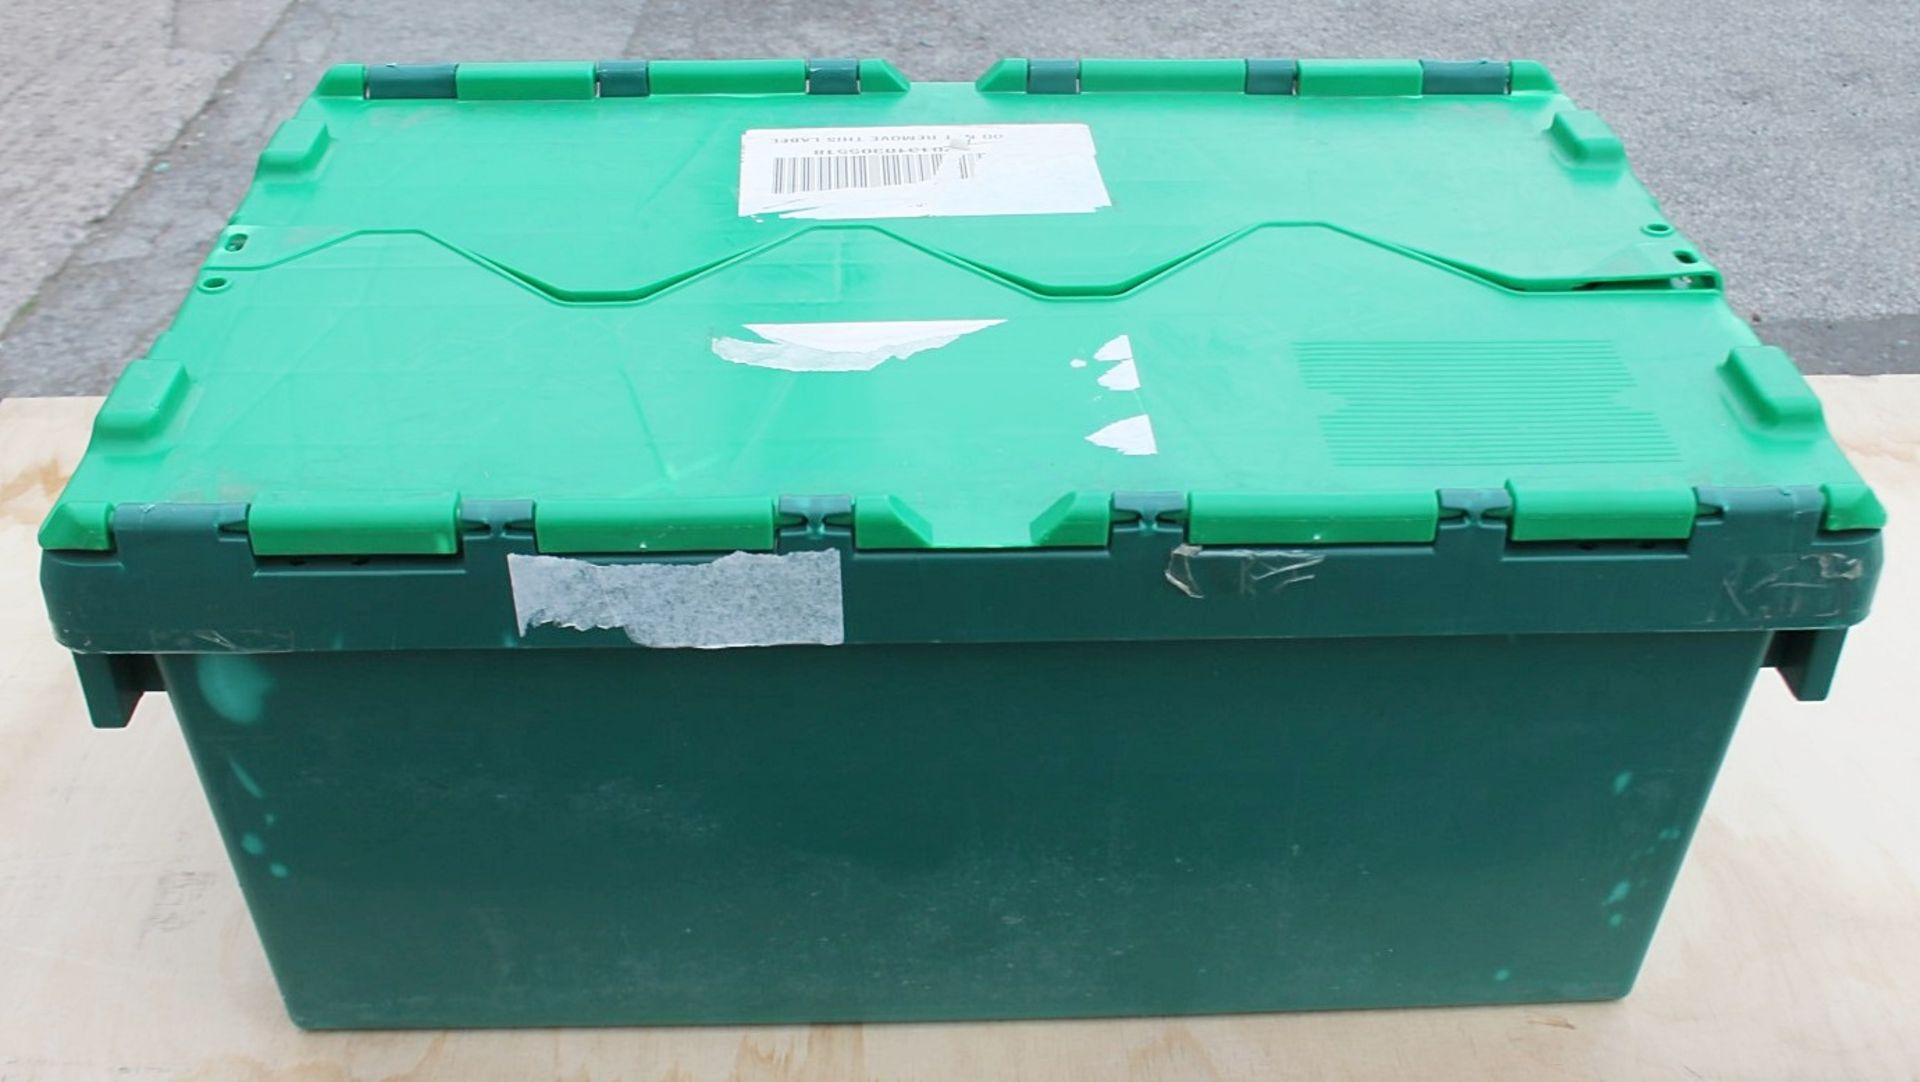 20 x Robust Low Profile Green Plastic Secure Storage Boxes With Attached Hinged Lids - Dimensions: - Image 2 of 6